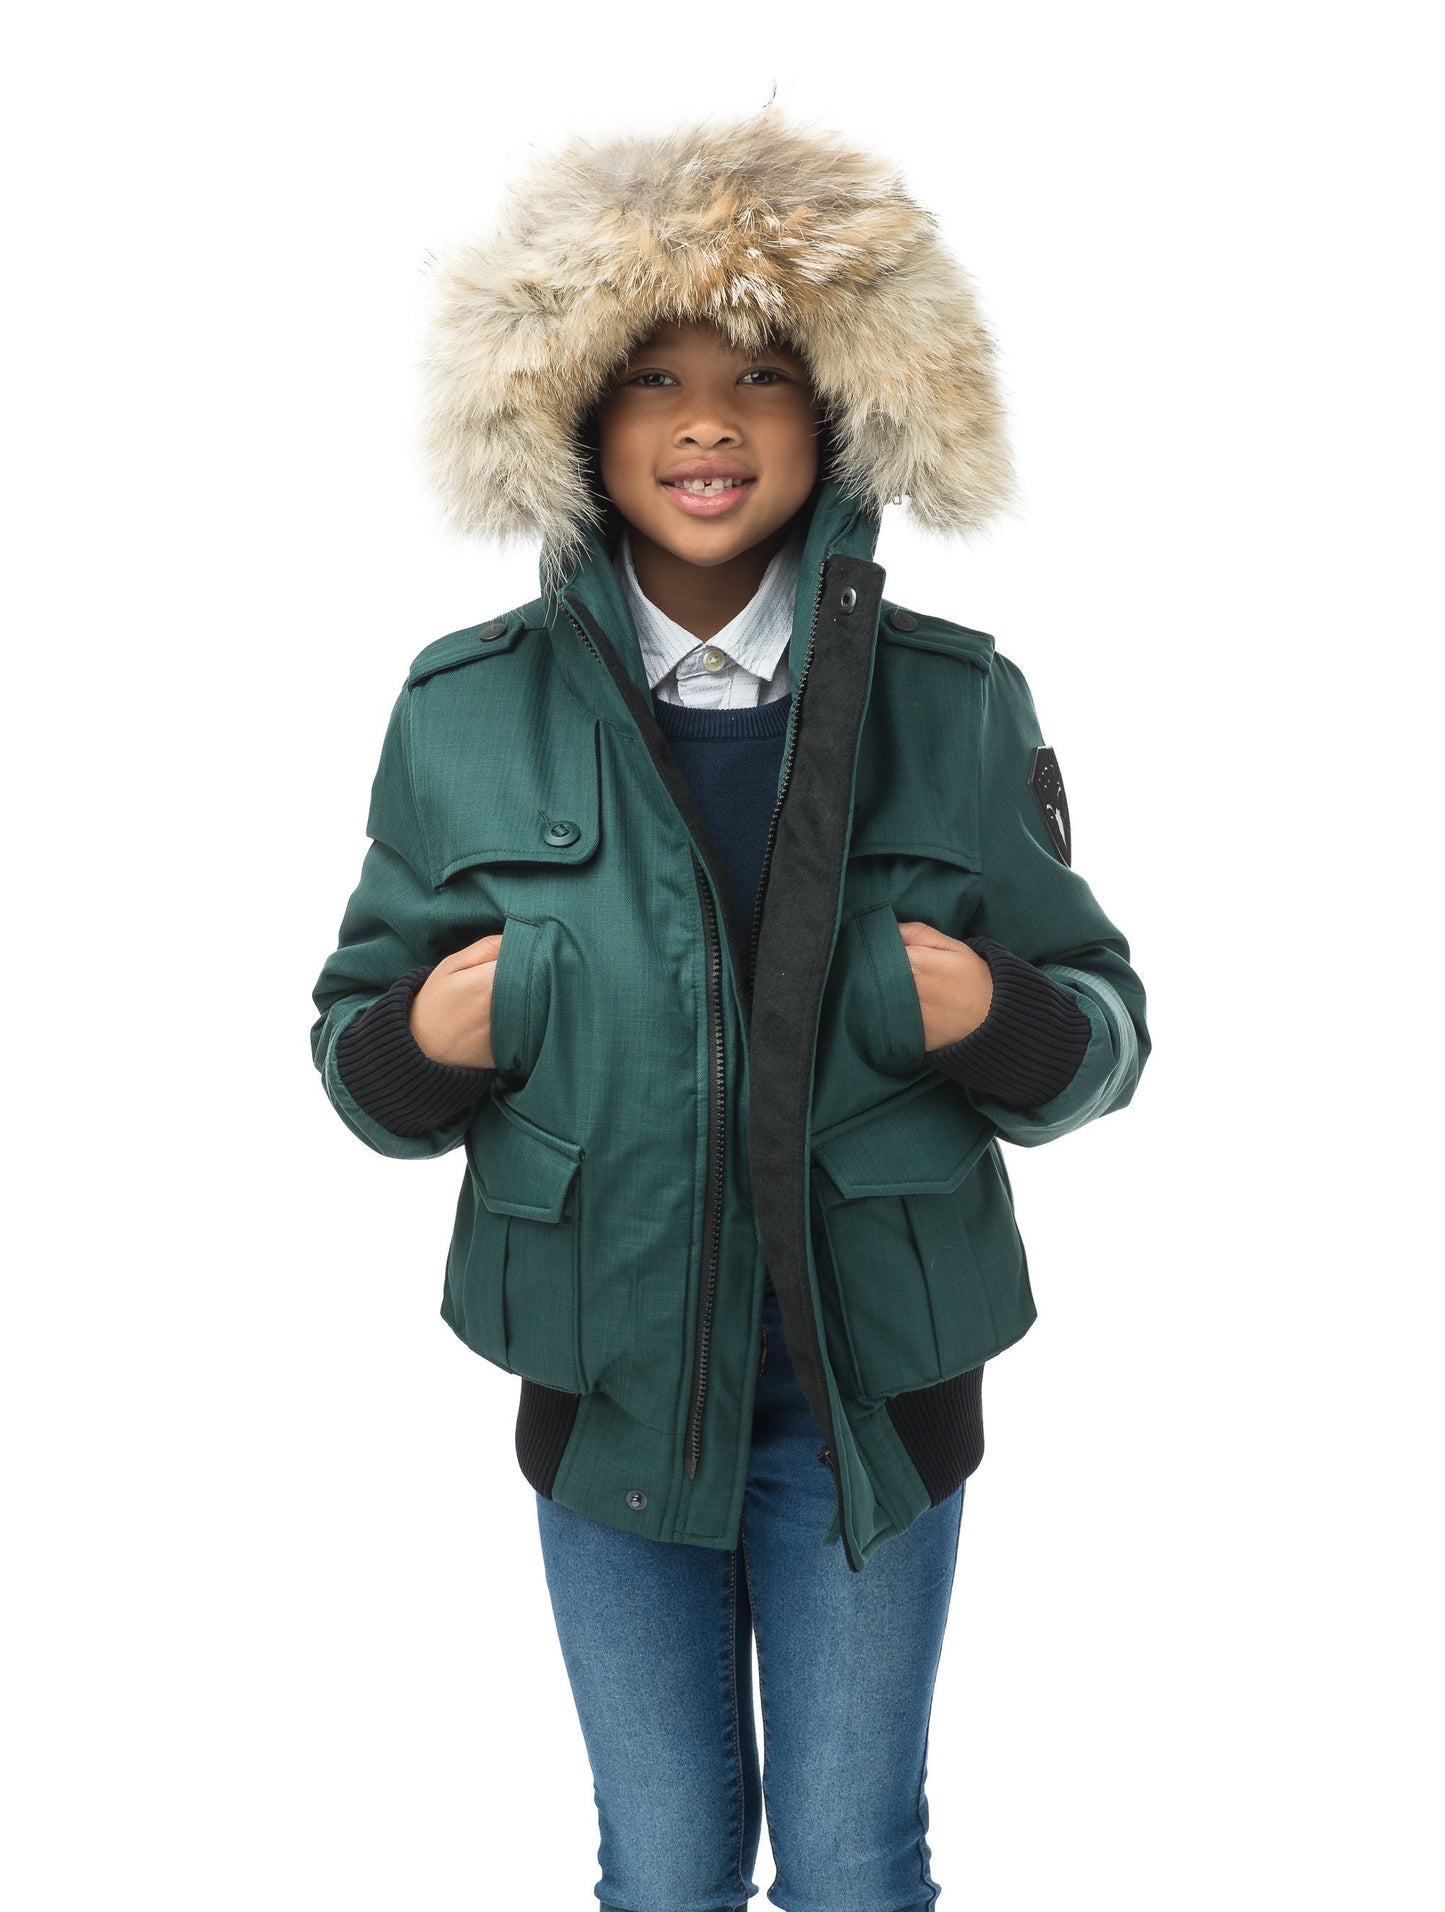 Kid's waist length down bomber jacket with fur trim hood in CH Forest